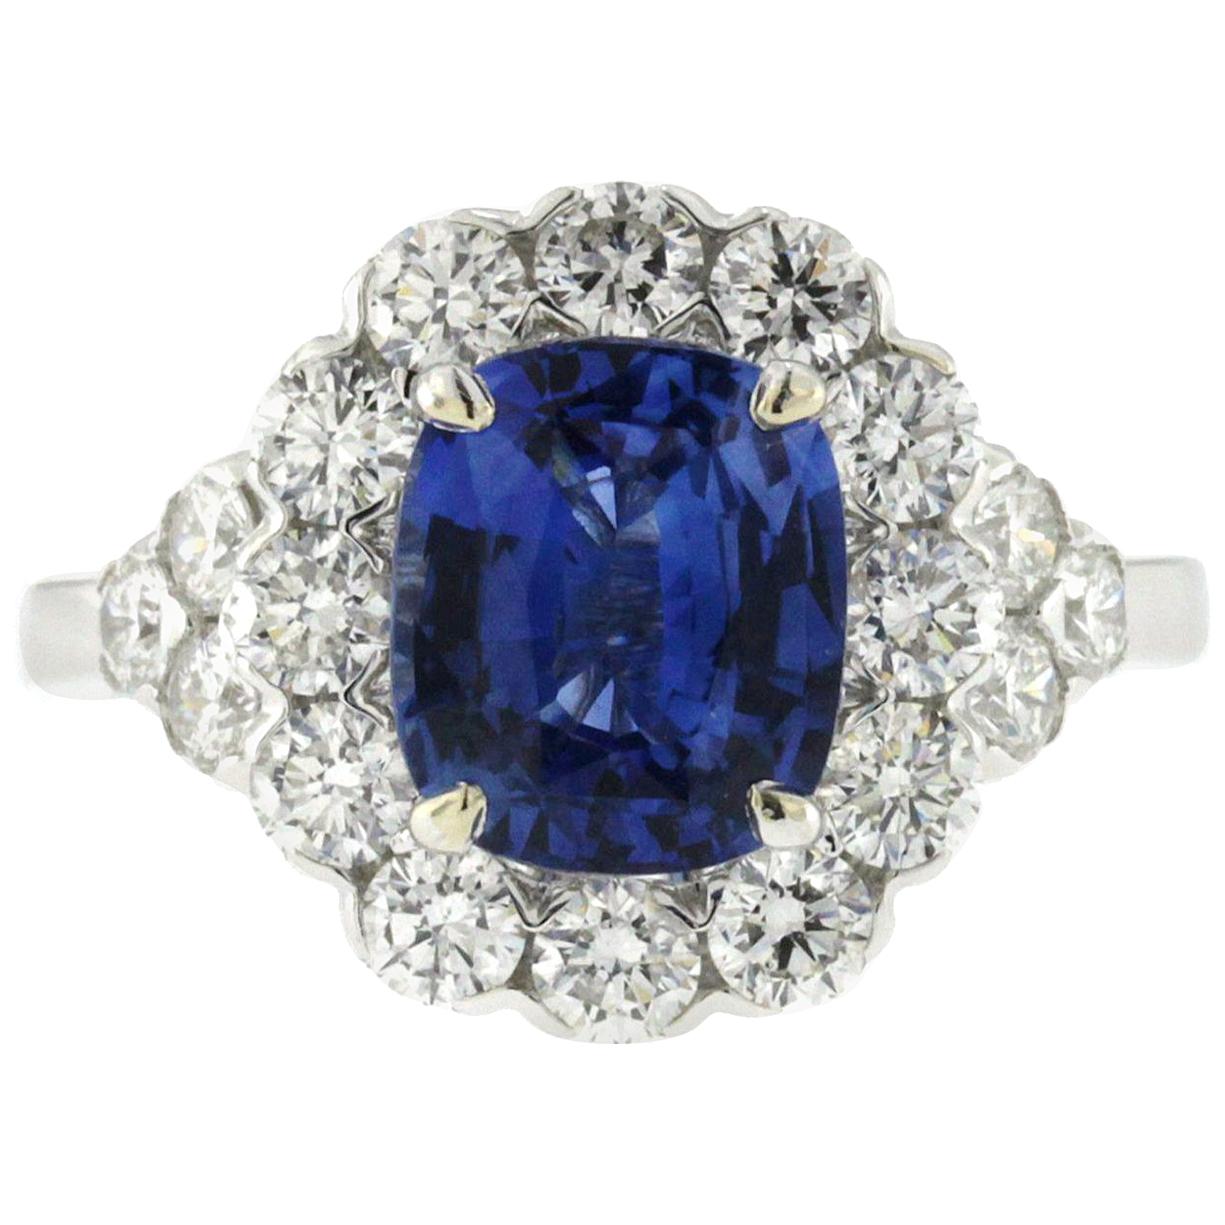 White 3 Ct Ceylon Sapphires & 1.48 Ct Diamonds In 18k Gold Engagement Ring For Sale